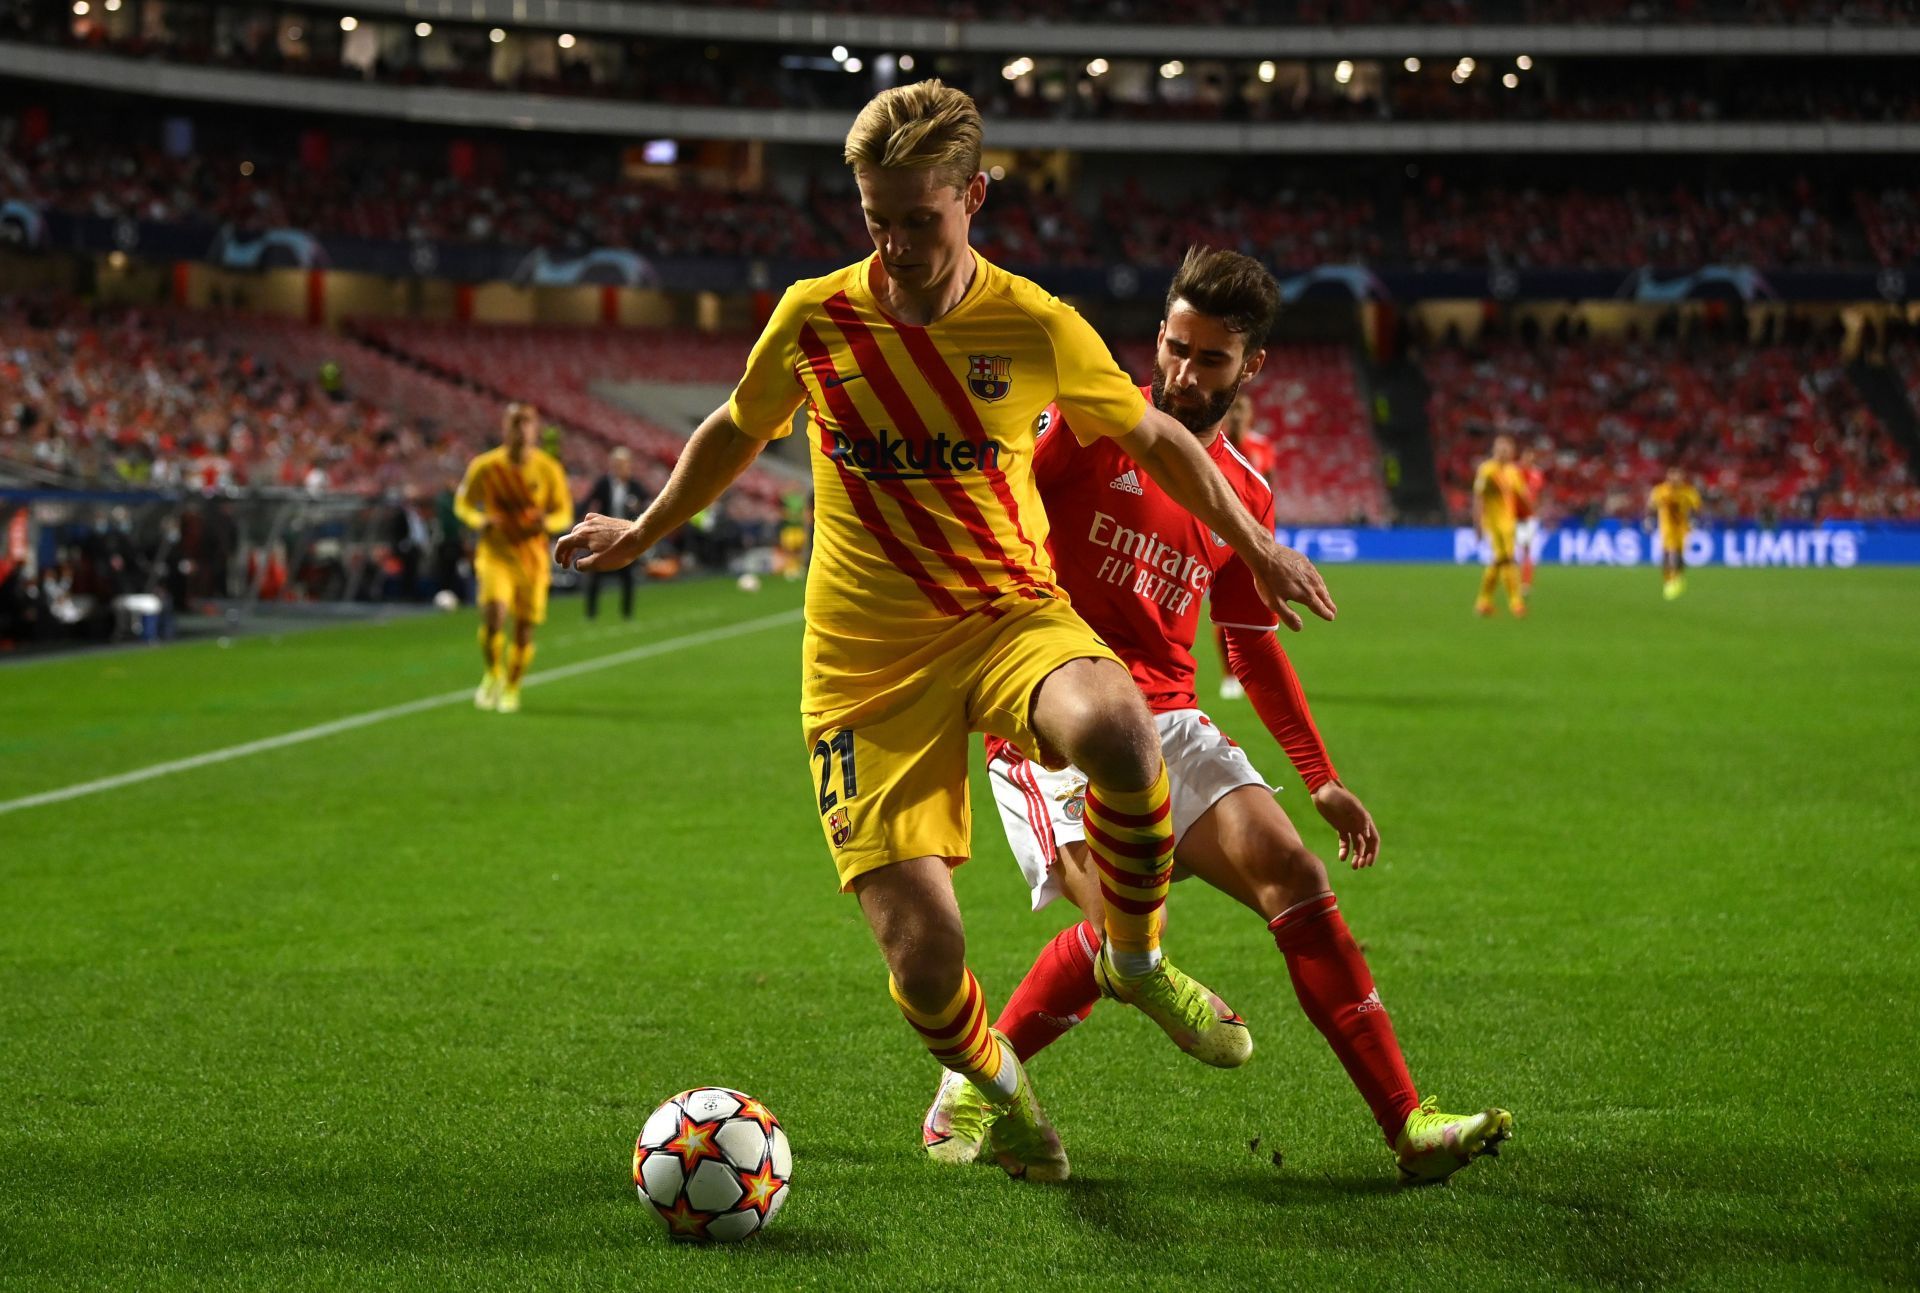 Frenkie de Jong is beginning to come into his own at Barcelona.